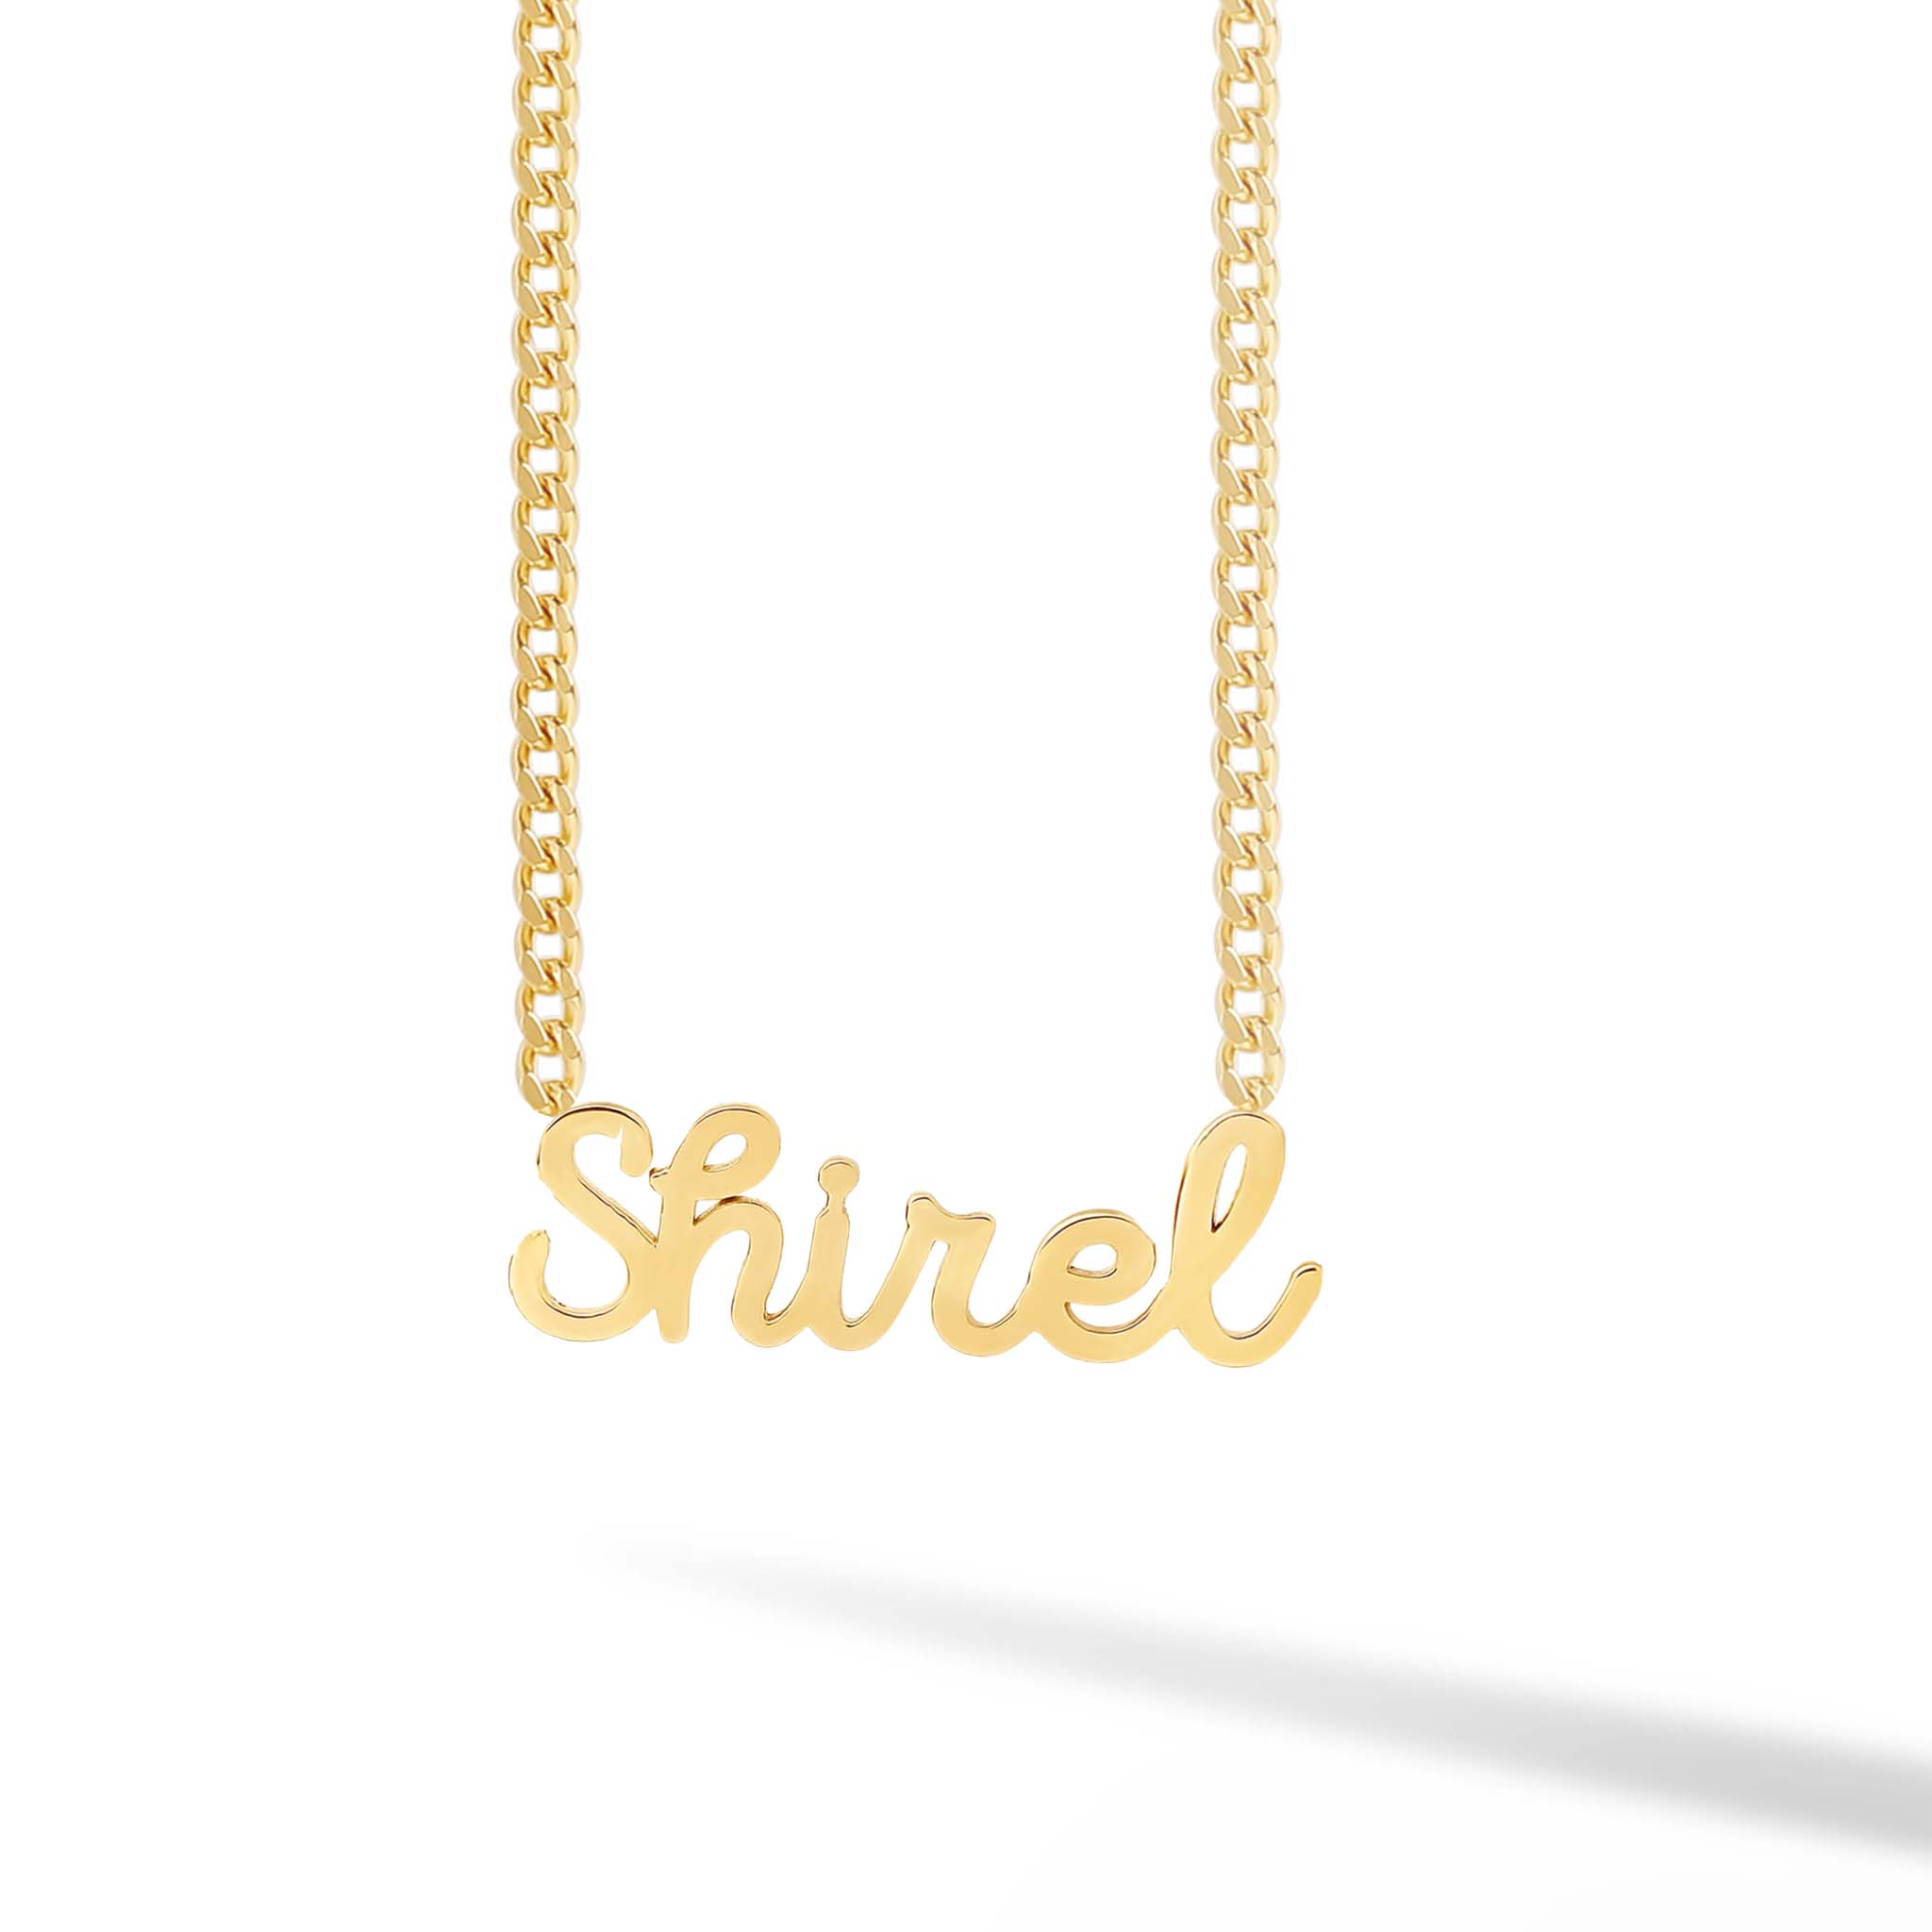 Custom Solid Name on Curb Cuban Link Necklace